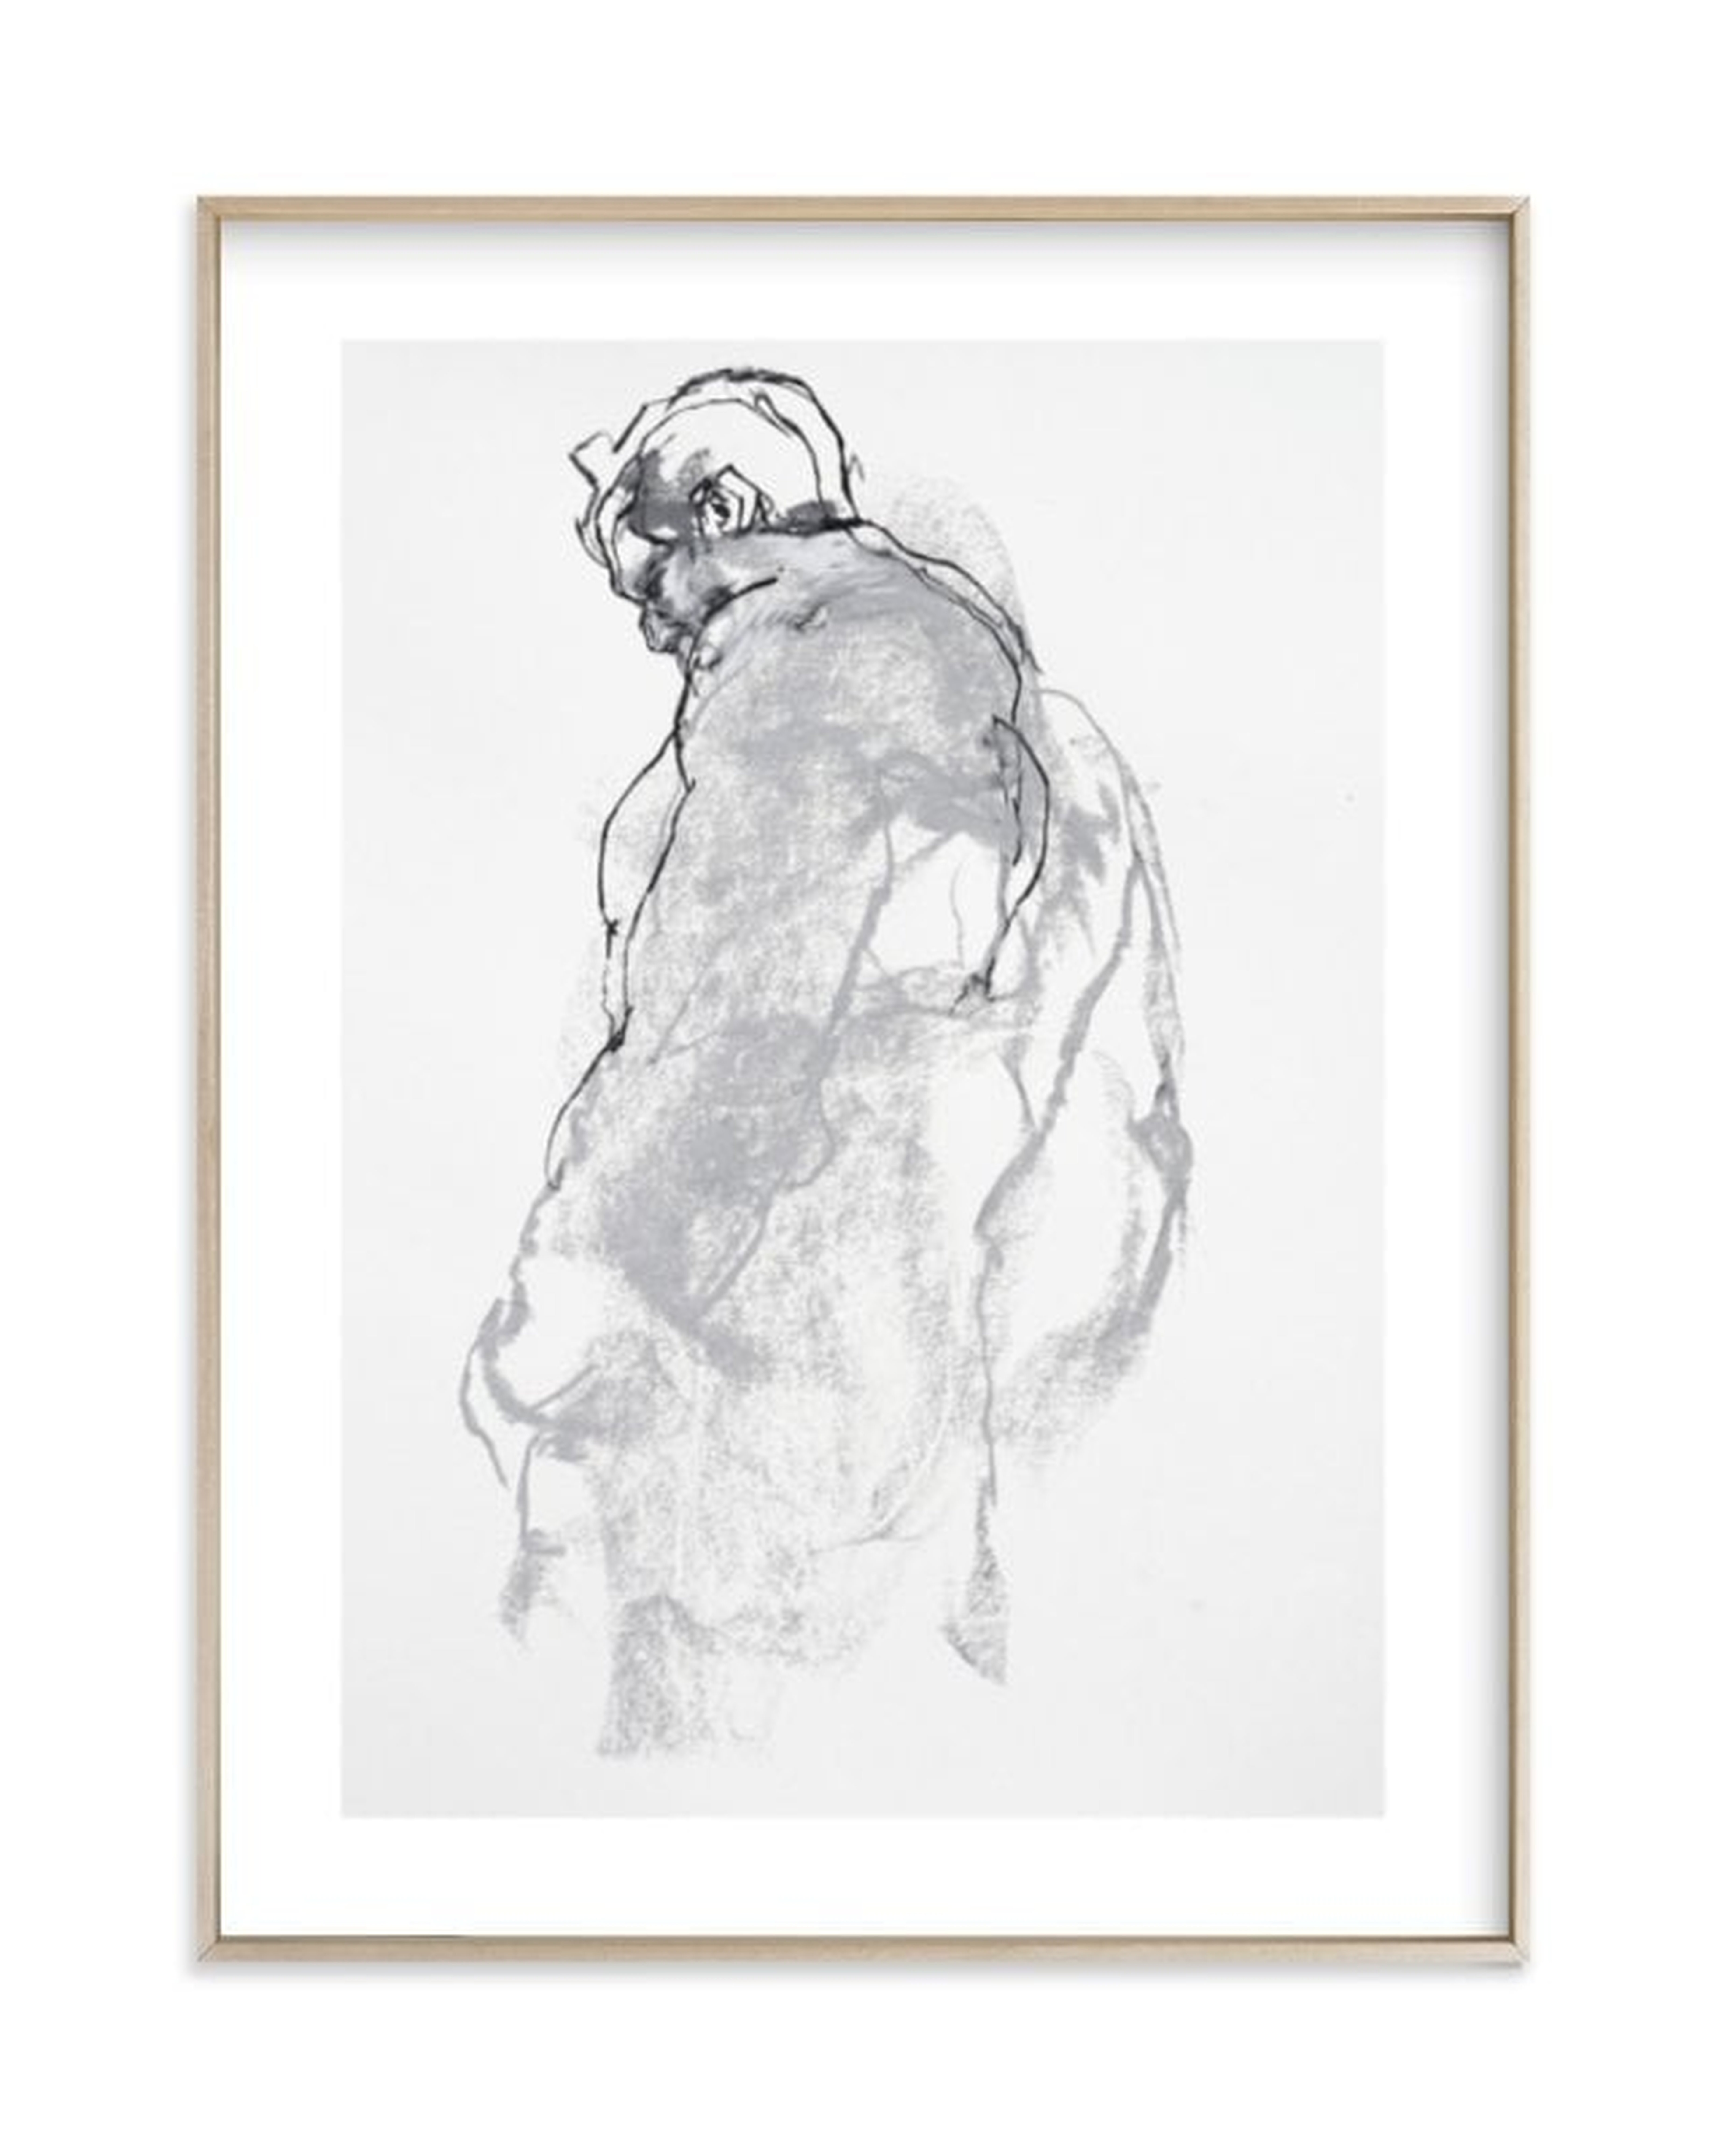 drawing 357 - figure from the side-18x24 -Matt brass frame-Matted - Minted